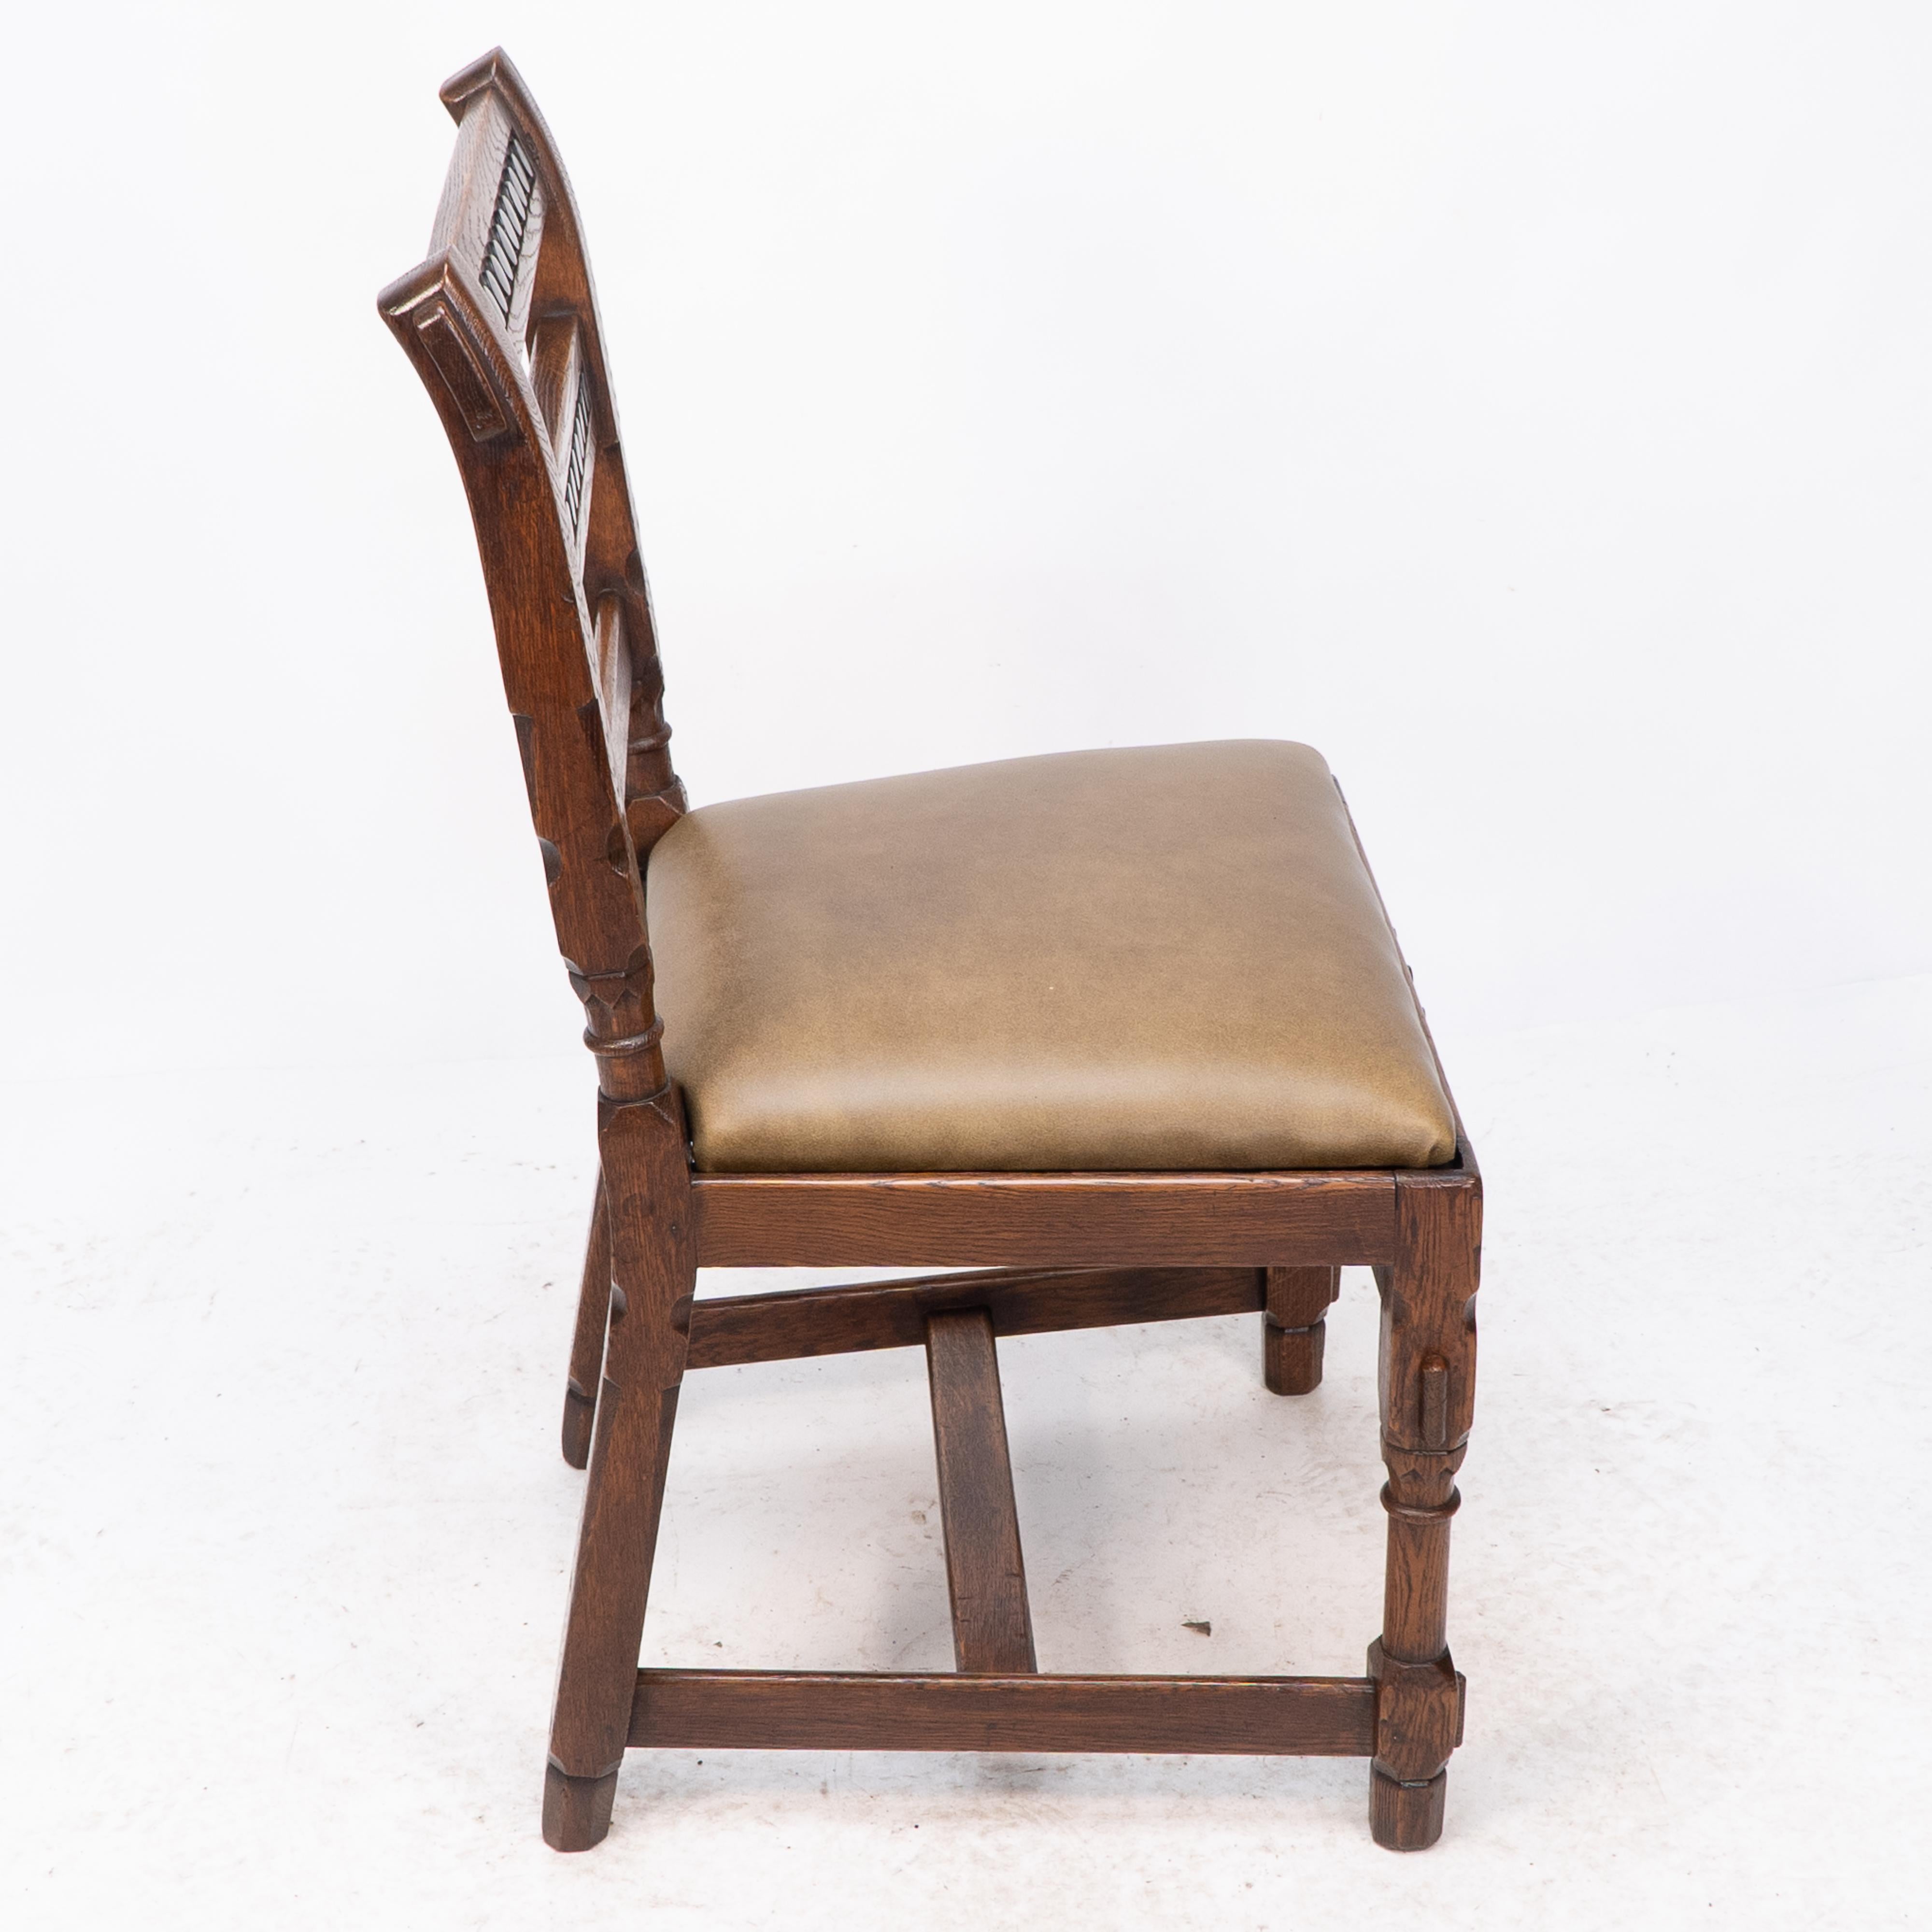 Late 19th Century J P Seddon attri. An Aesthetic Movement oak side chair with ebonized circles For Sale